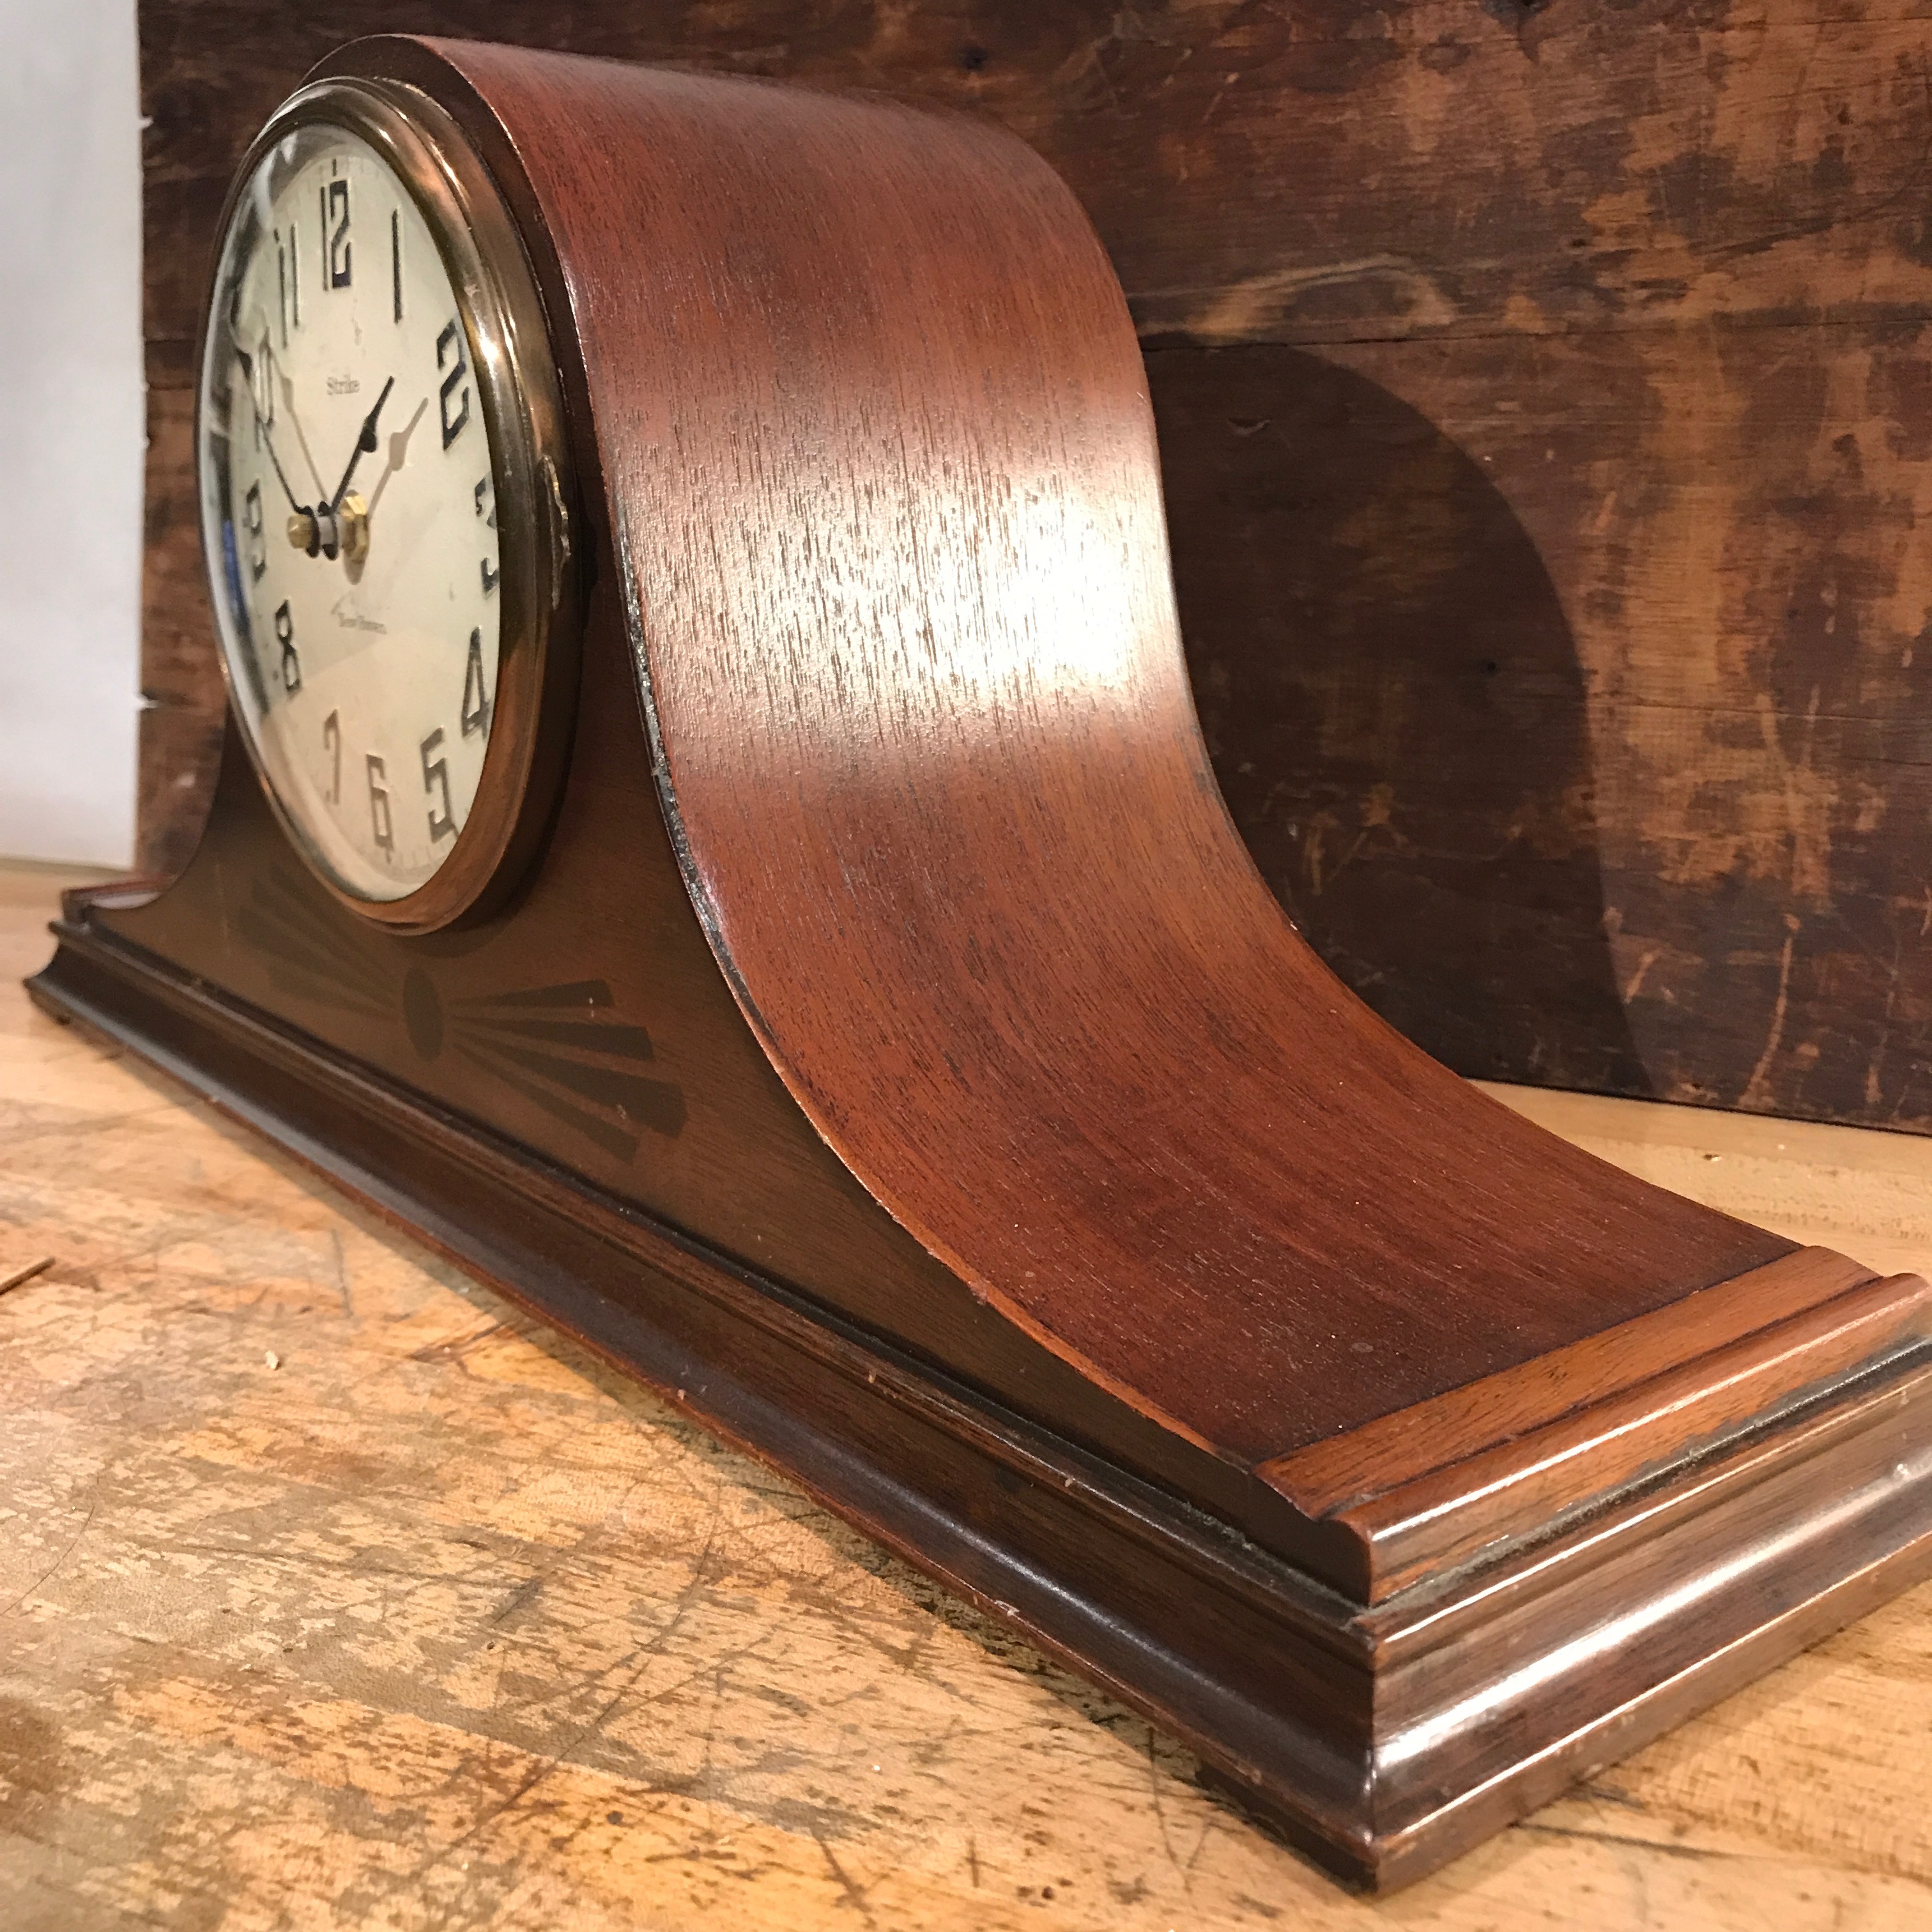 New Haven Humpback Mantle Clock - this style first appeared in the